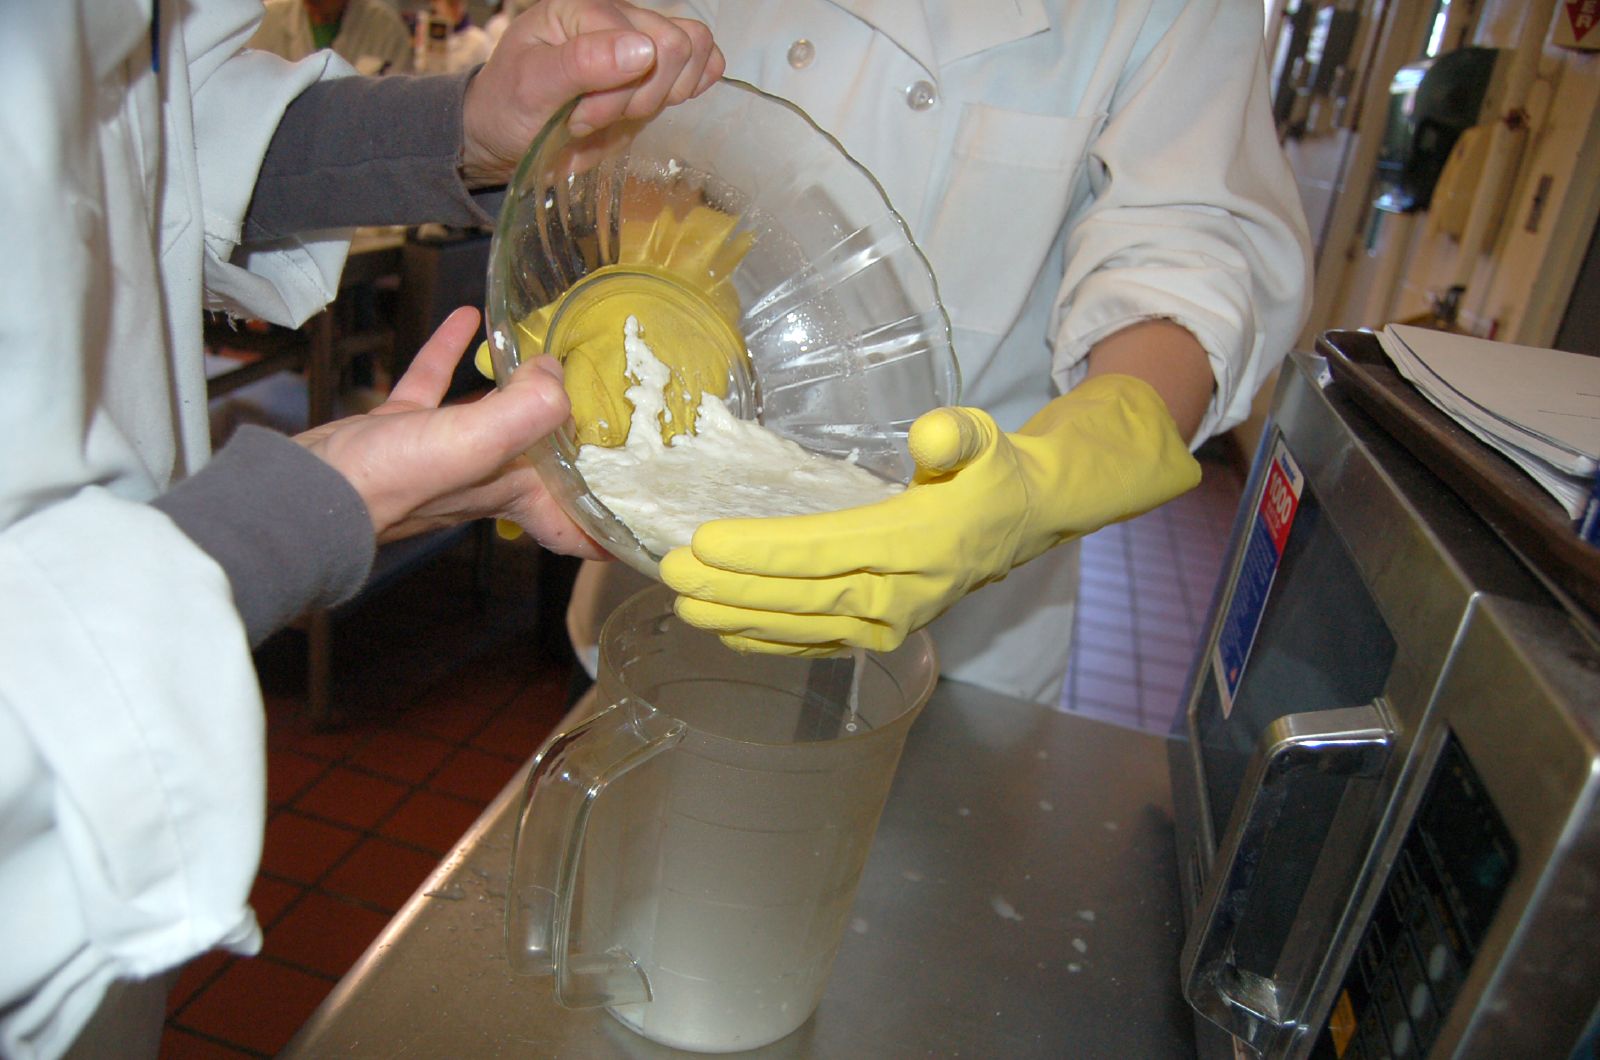 a close up of a person in gloves mixing some food